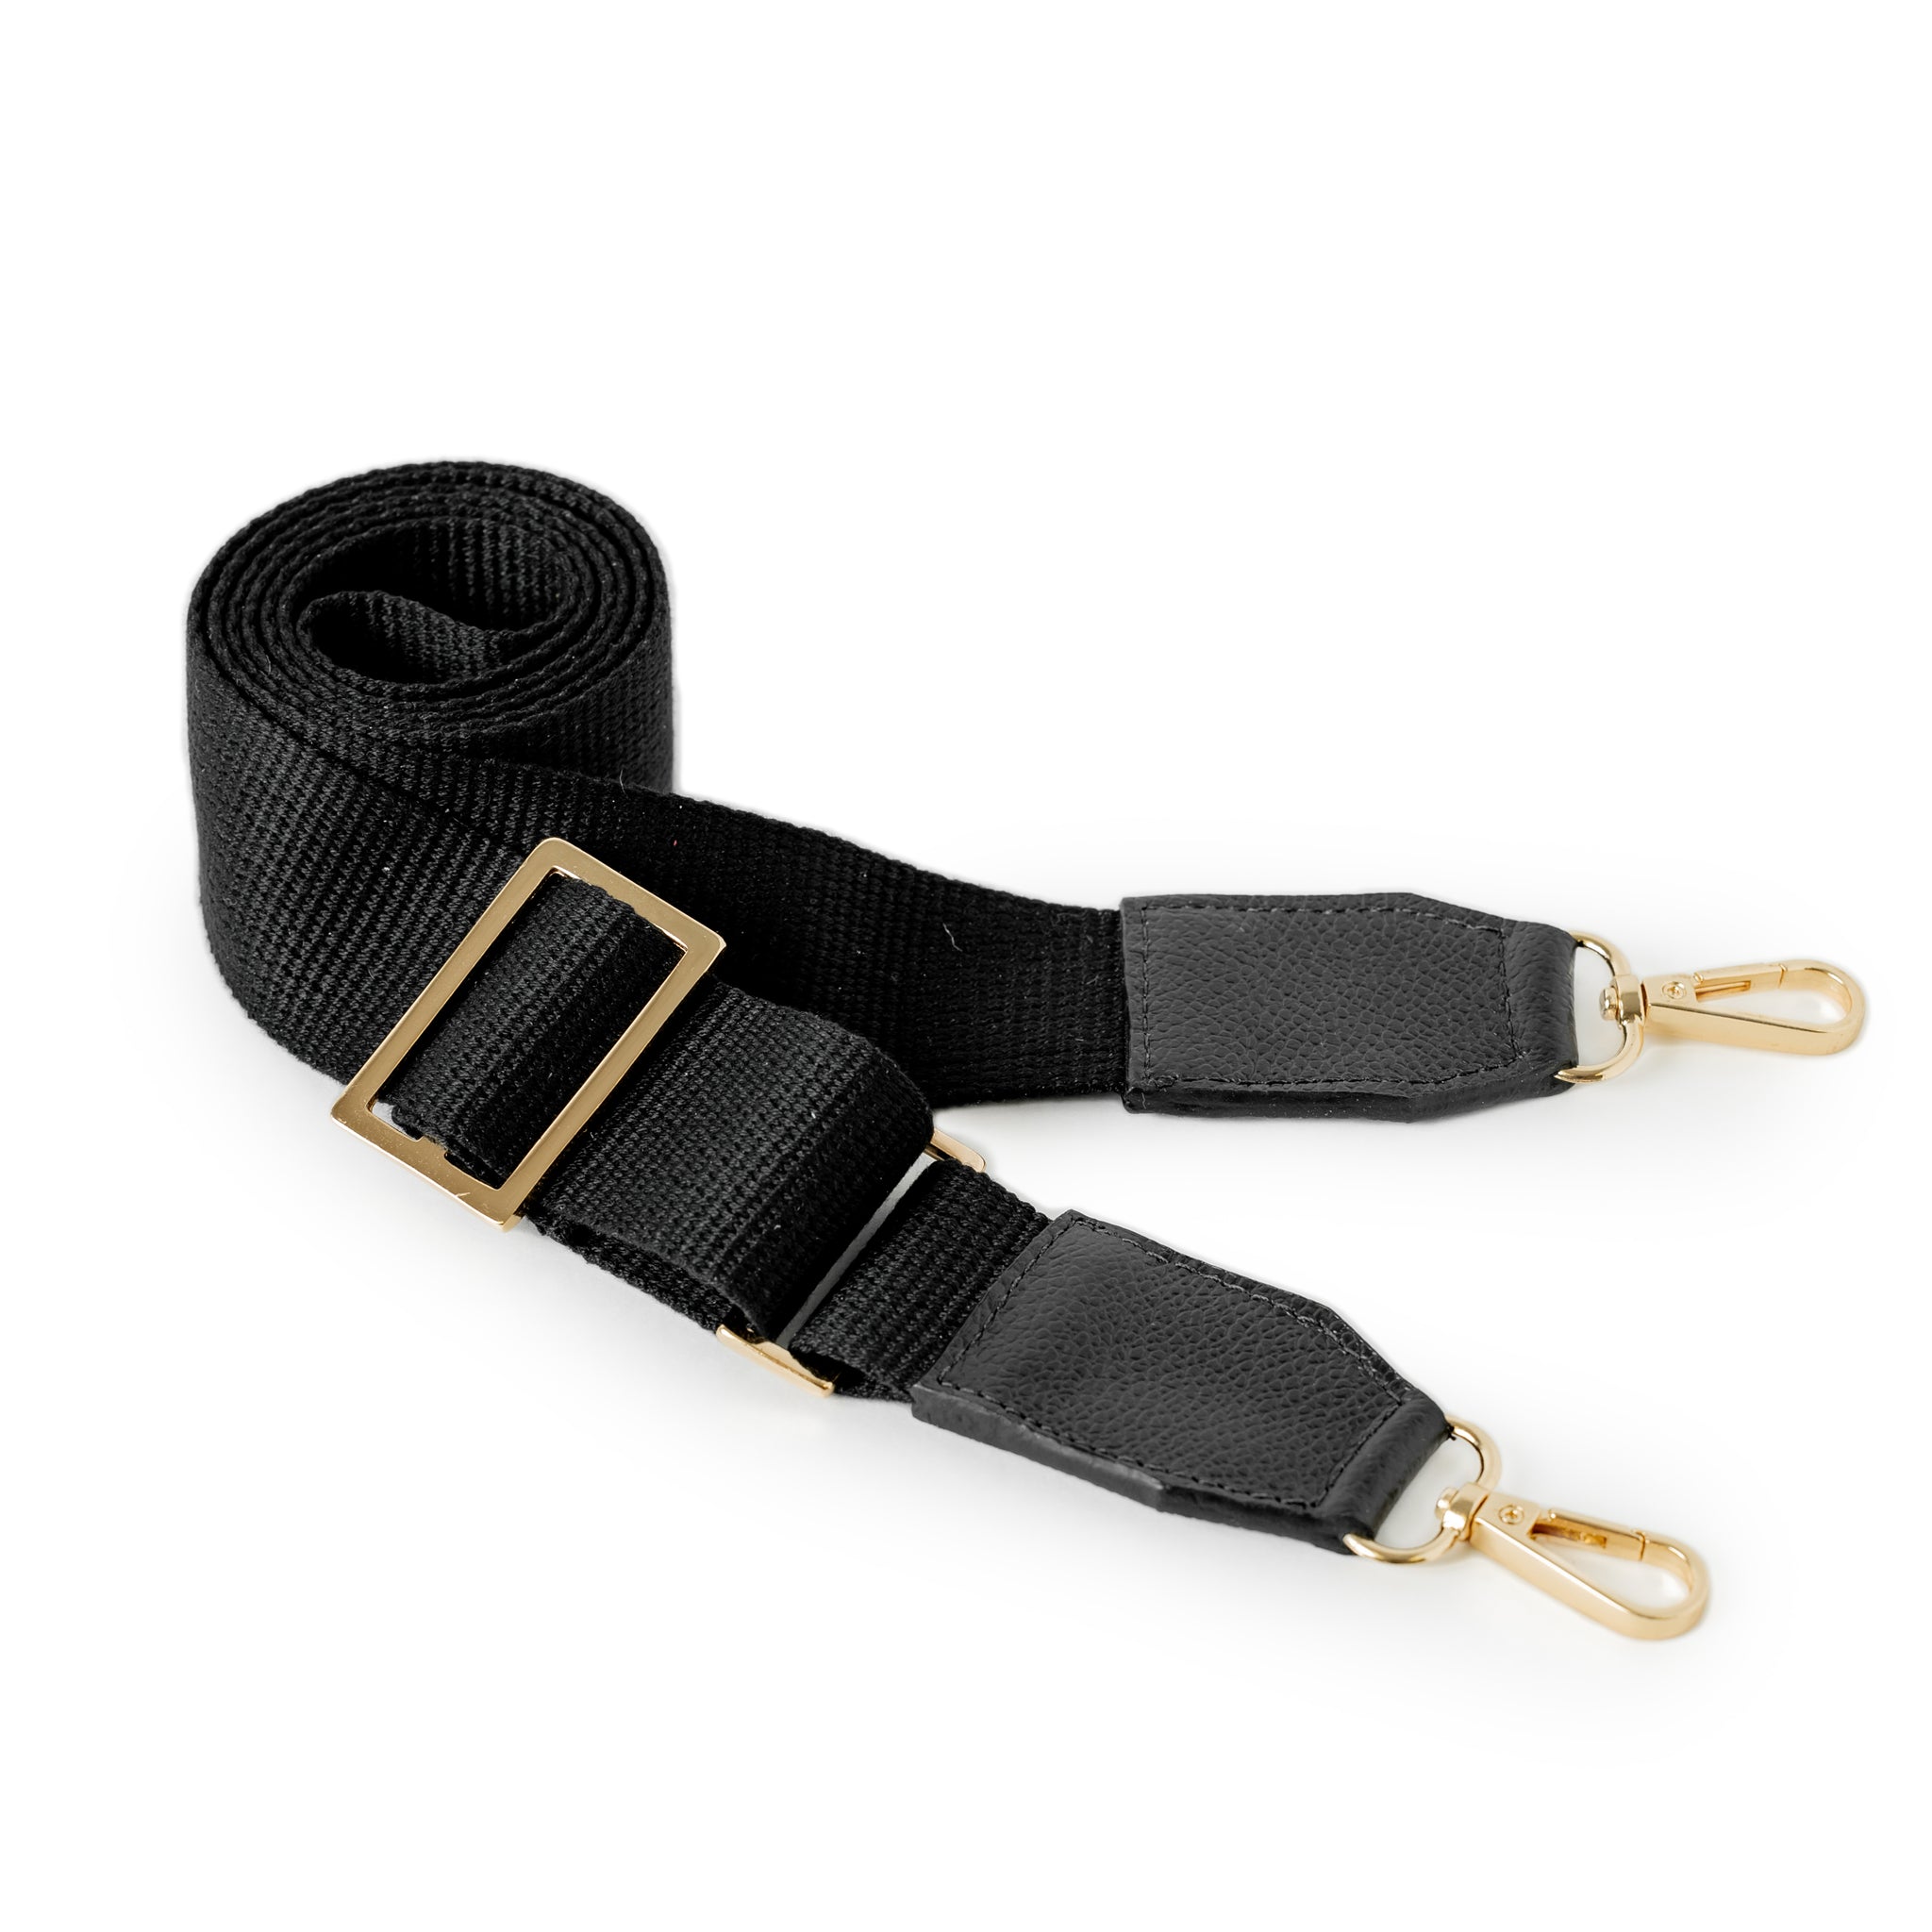 Black Strap by Nataly Mendez DETAILS Strap Length: Up to 55 inches Adjustable 